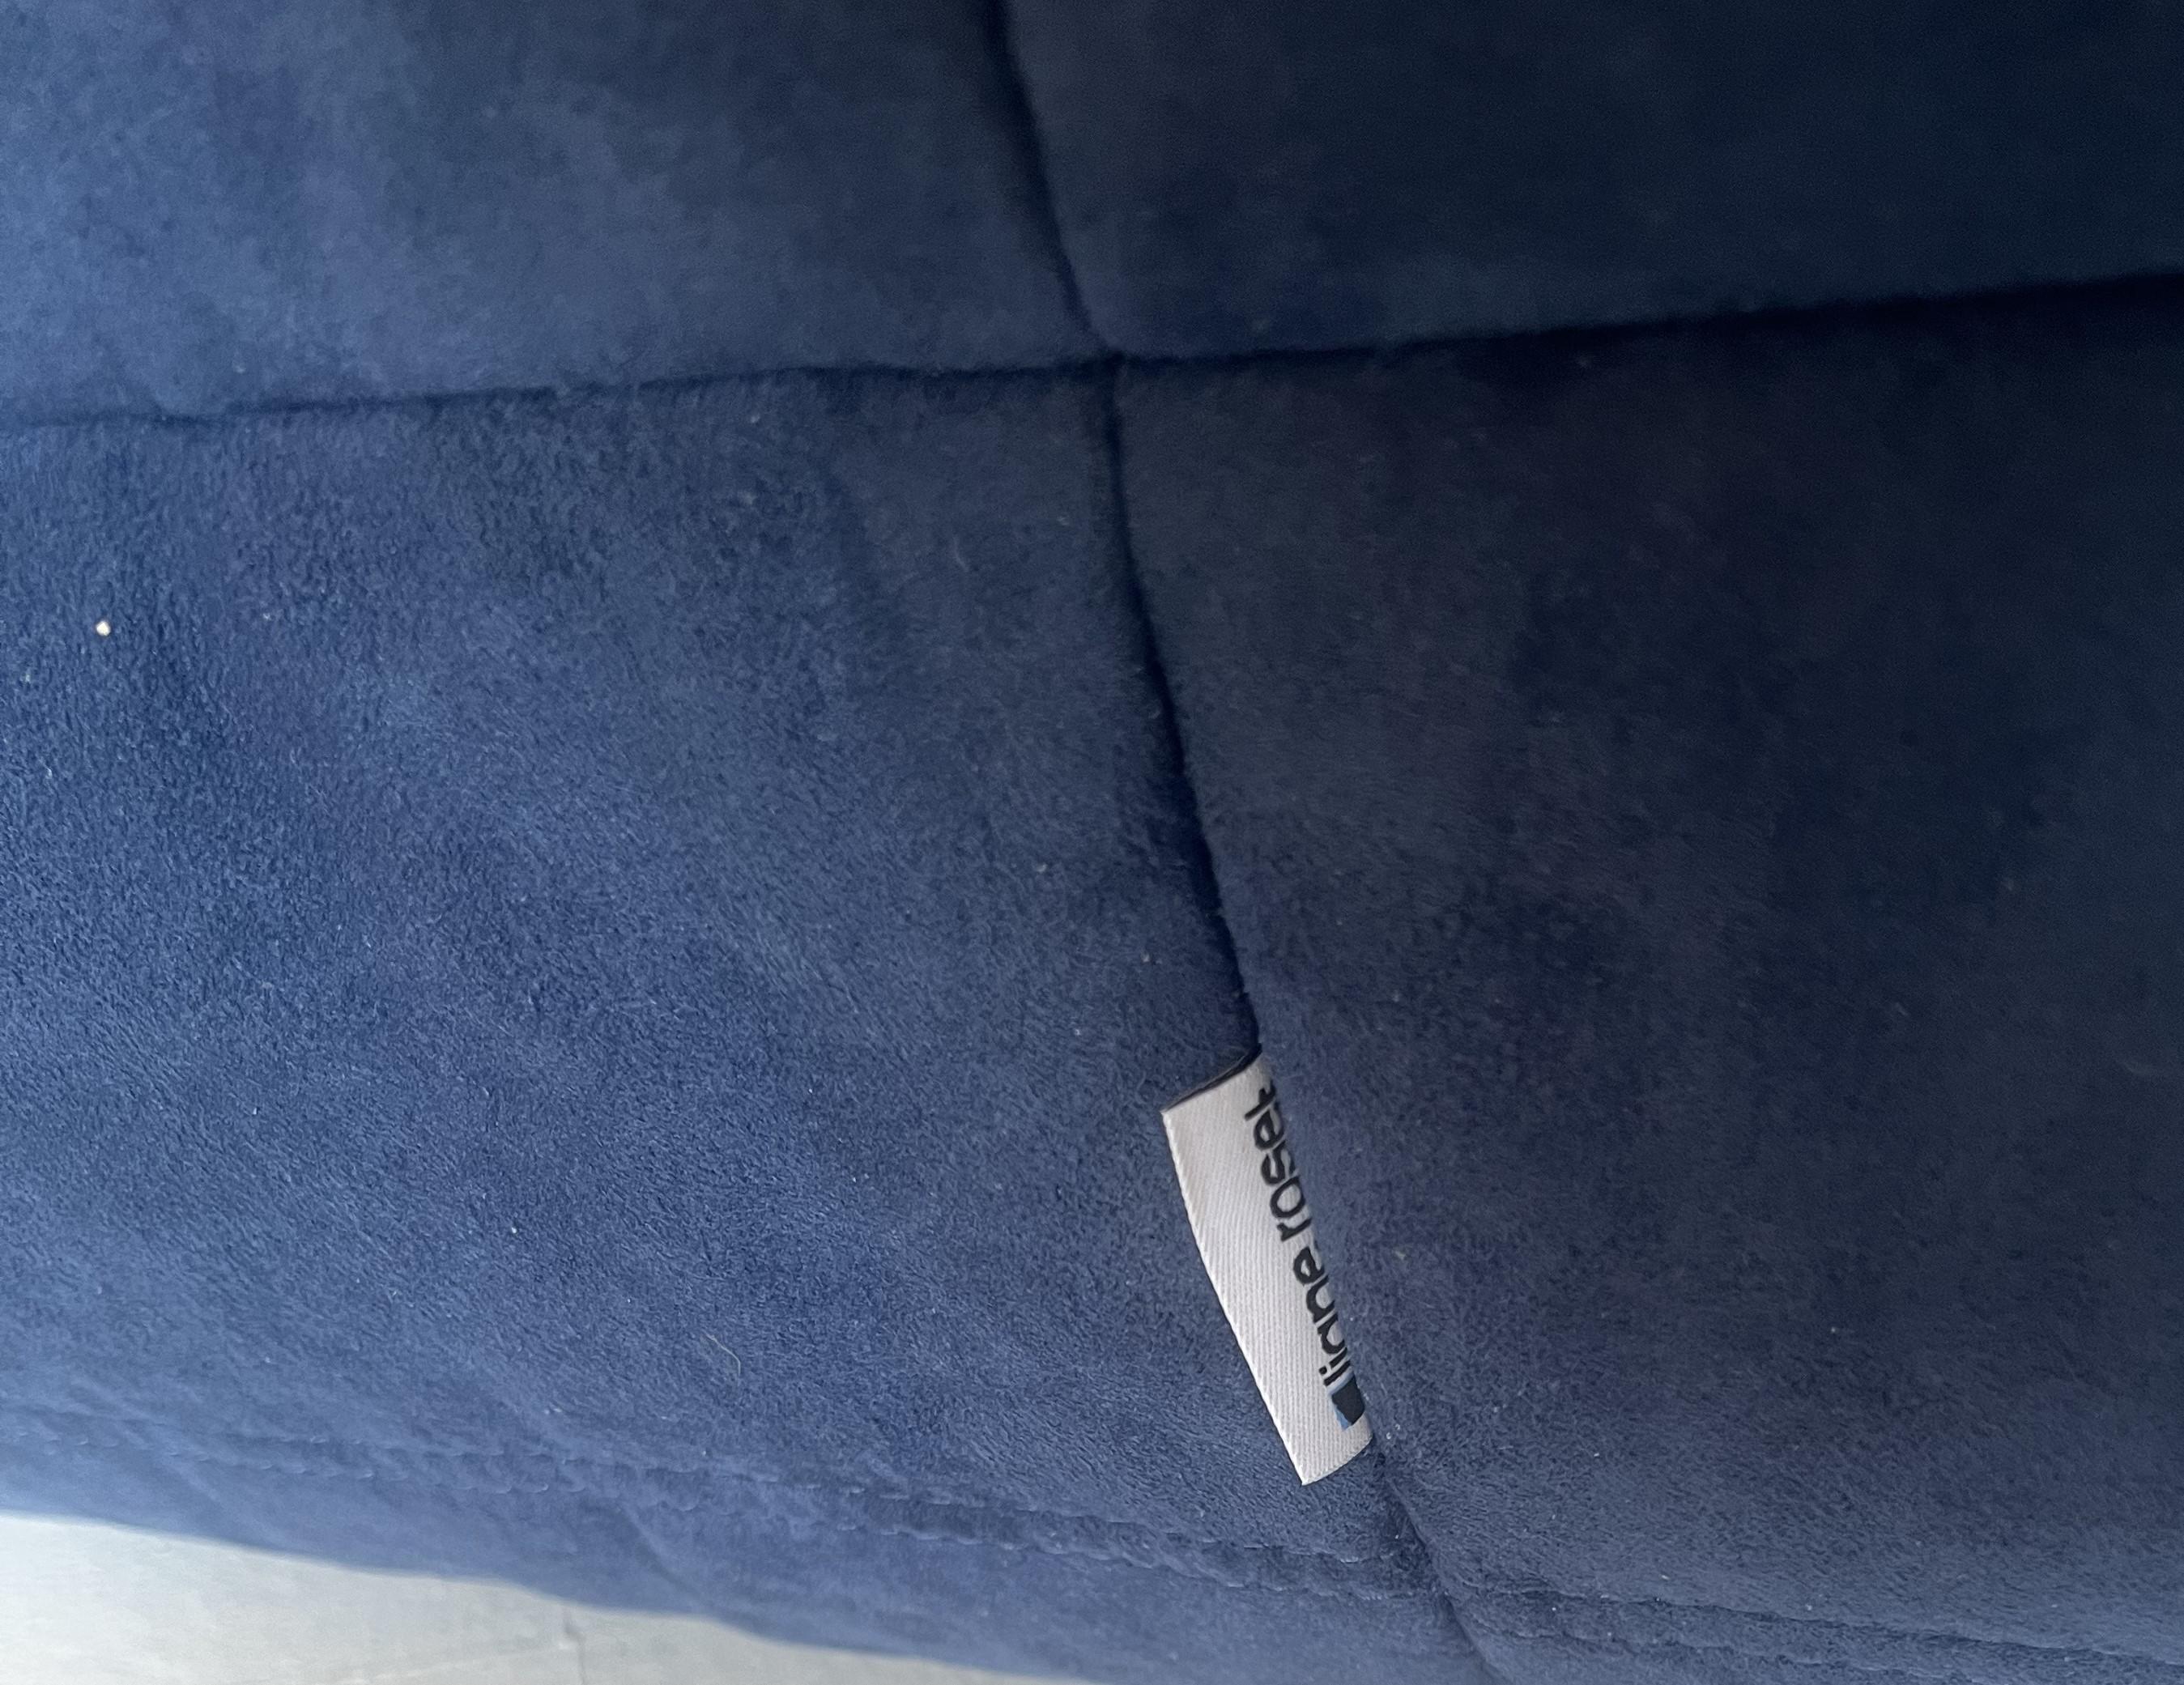 The iconic Togo sofa, originally designed by Michel Ducaroy for Ligne Roset in 1973, has become a design Classic.

This footstool is has been newly reupholstered in a soft, bright blue fabric.

The pieces feature the instantly recognizable